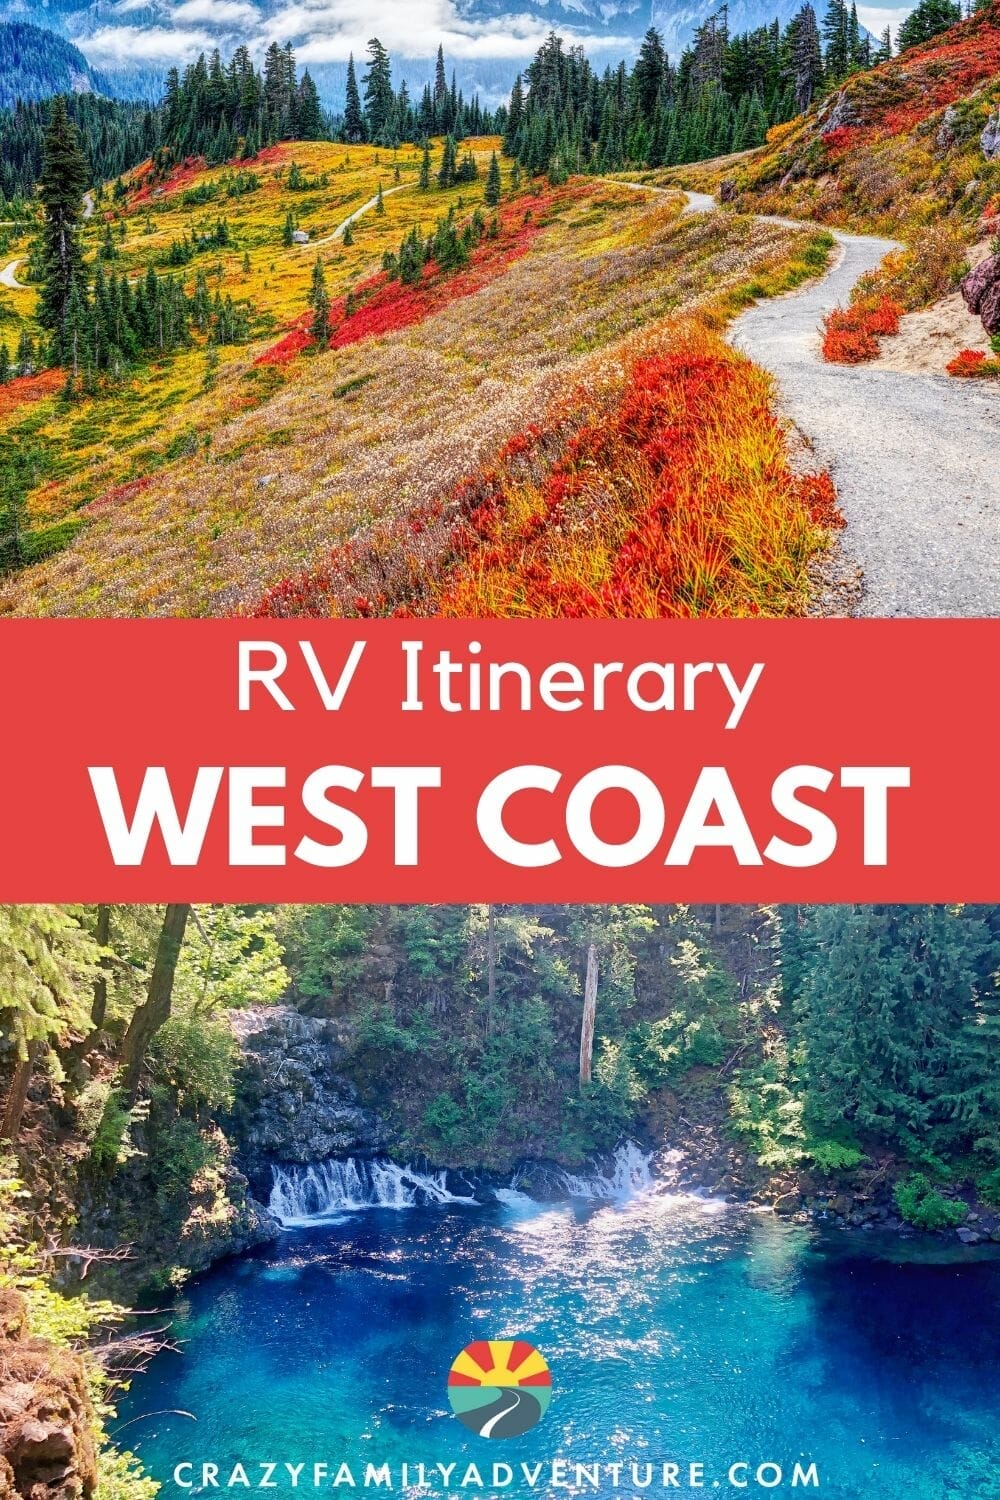 The west coast is a gorgeous place that is perfect for exploring by RV. Our RV Itinerary West Coast is one easy-to-read road trip plan.